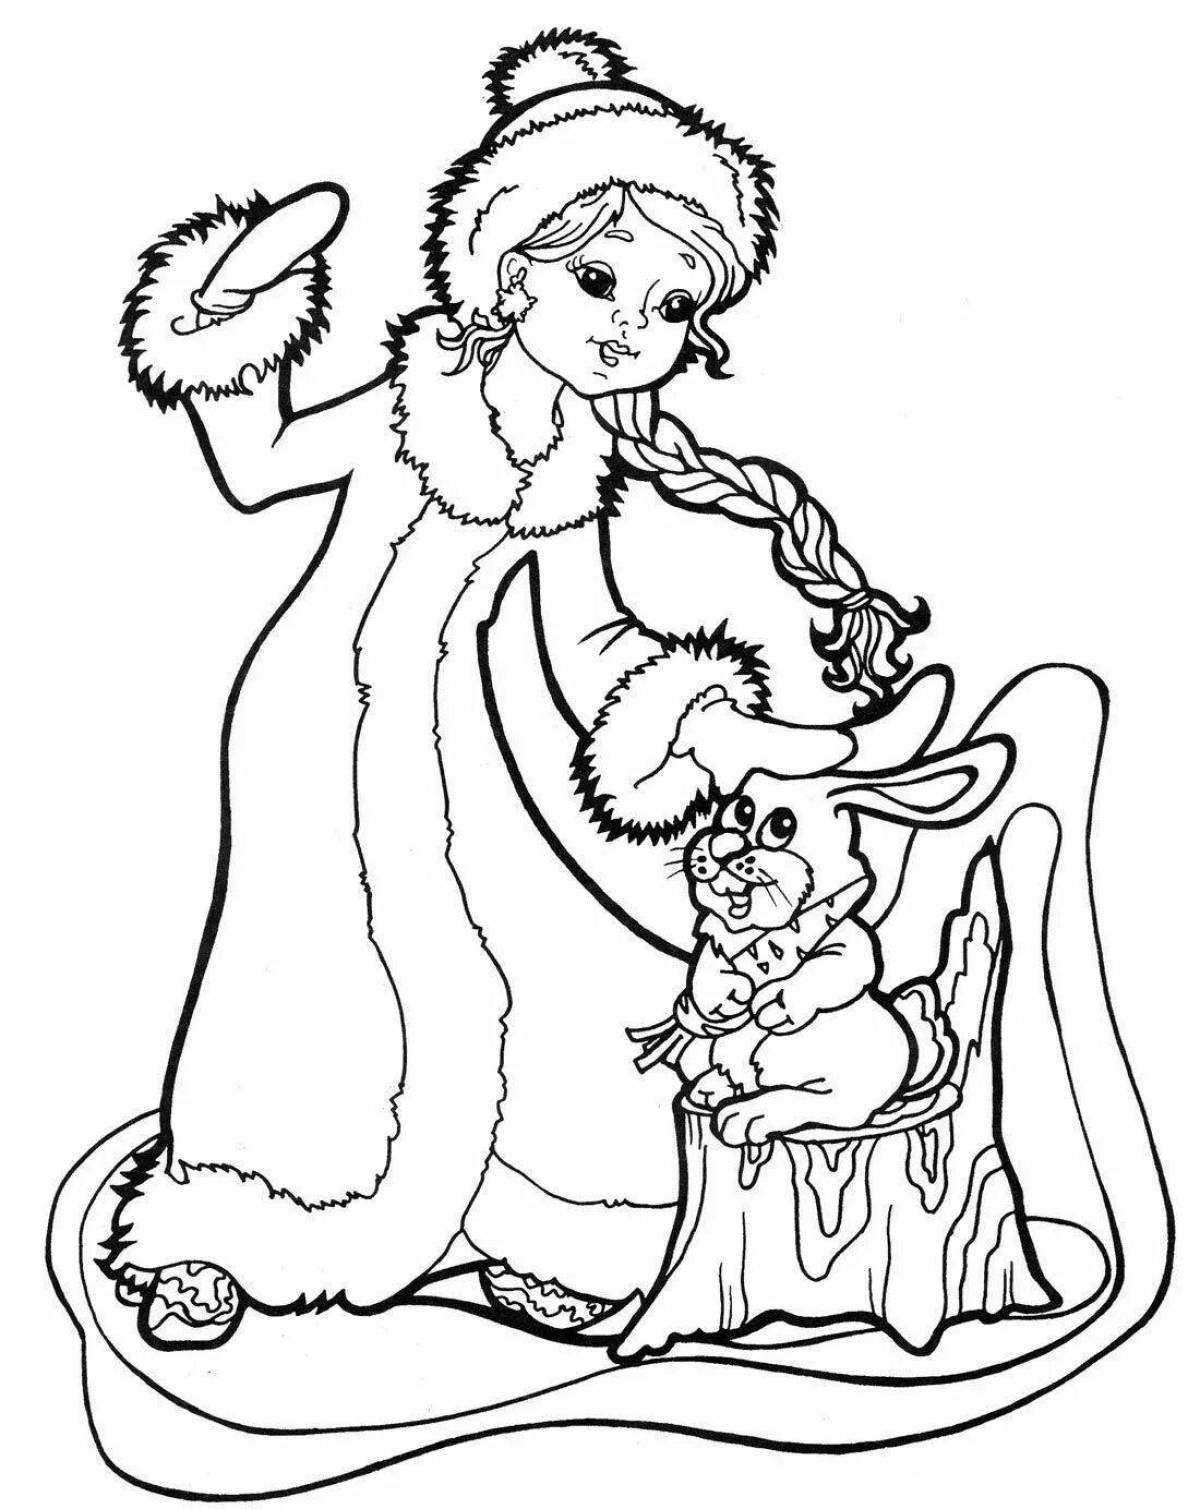 Snow Maiden glamor coloring for kids